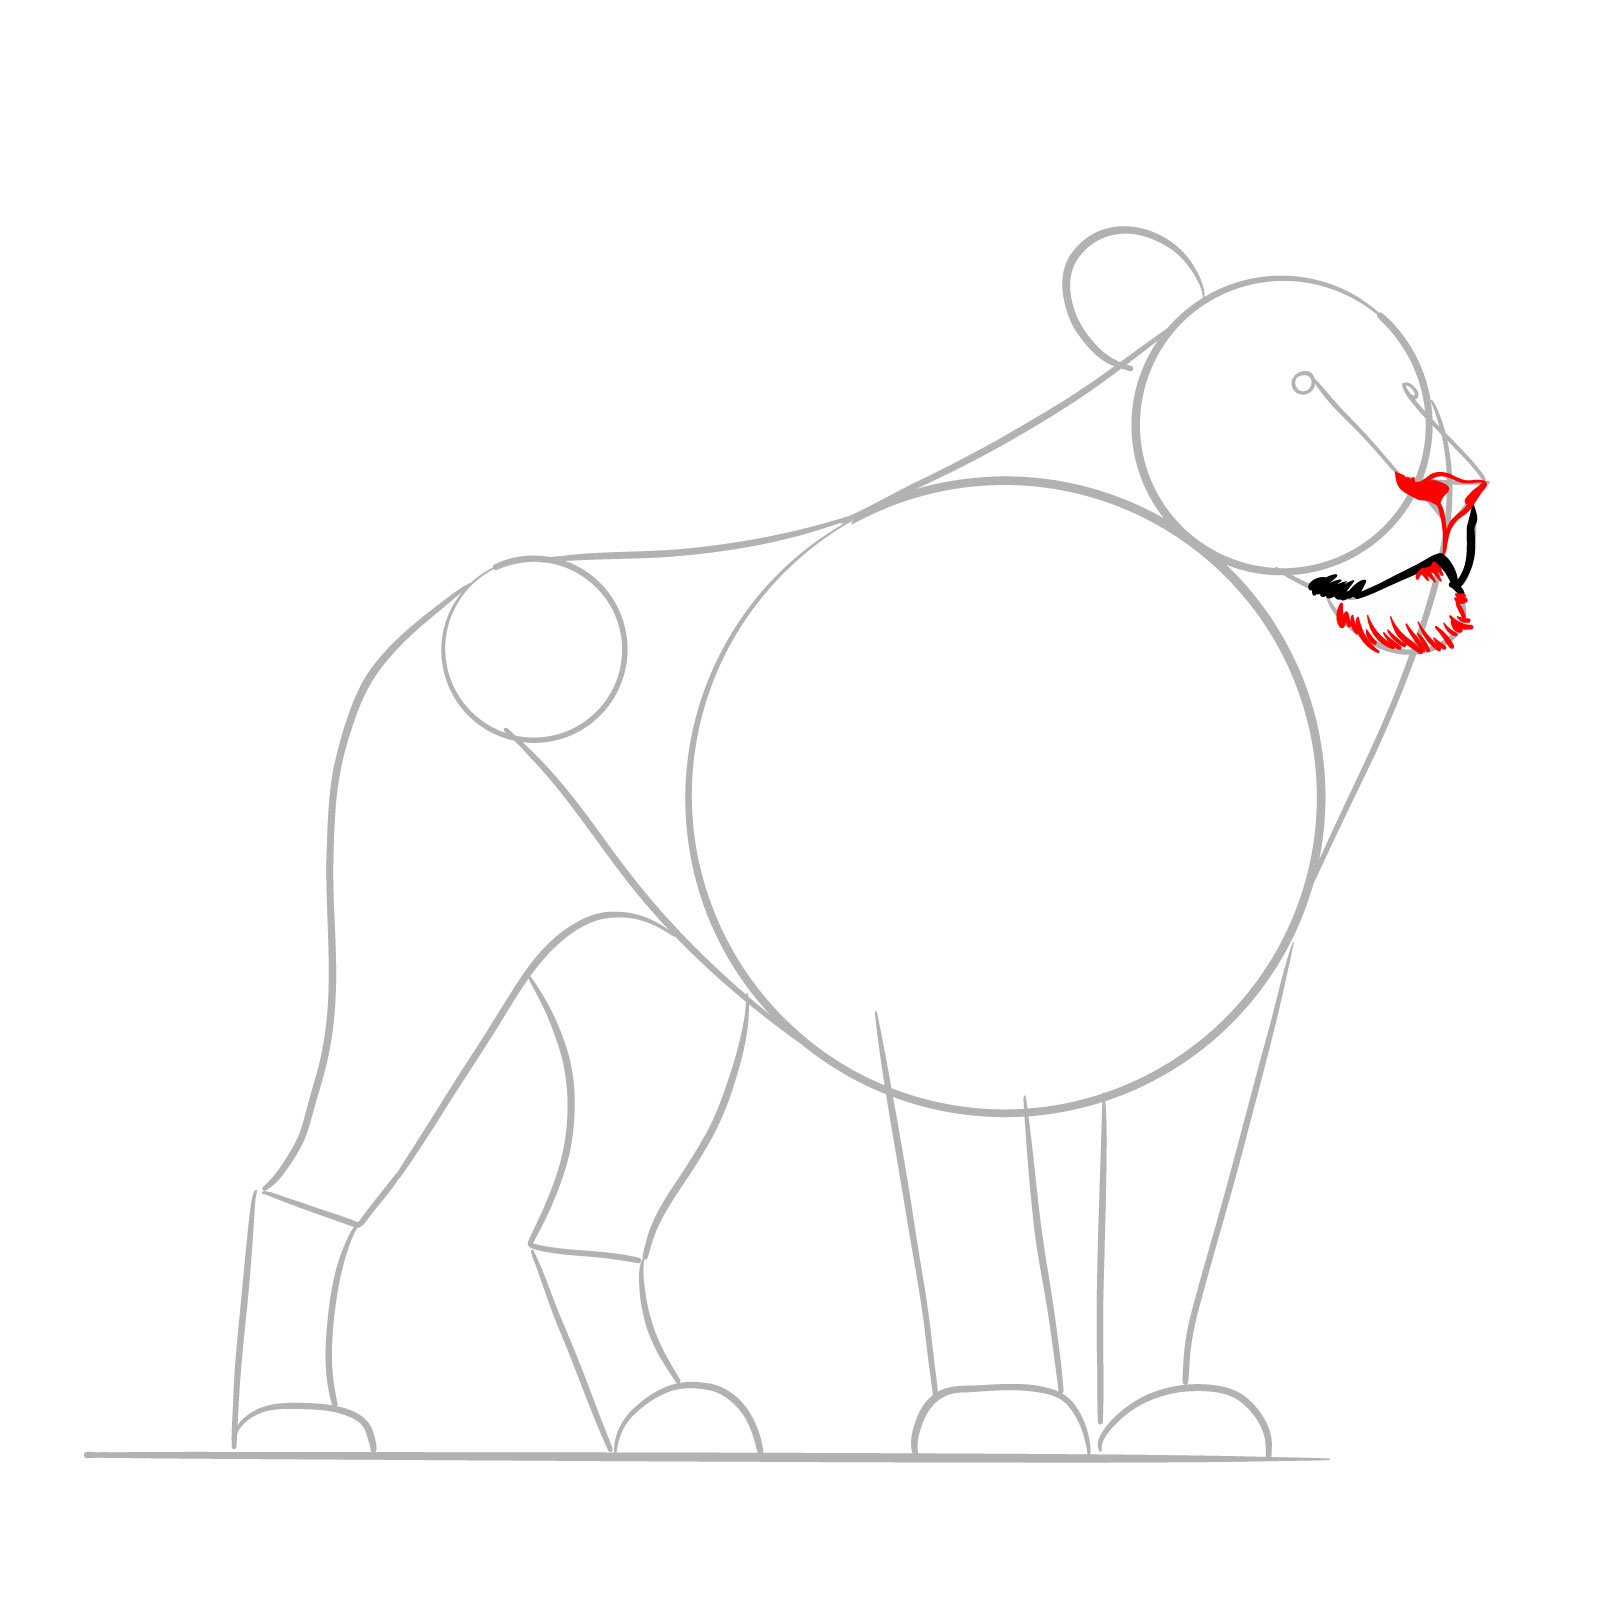 Illustrating the chin, nose, and mouth details in a standing lion drawing process - step 04